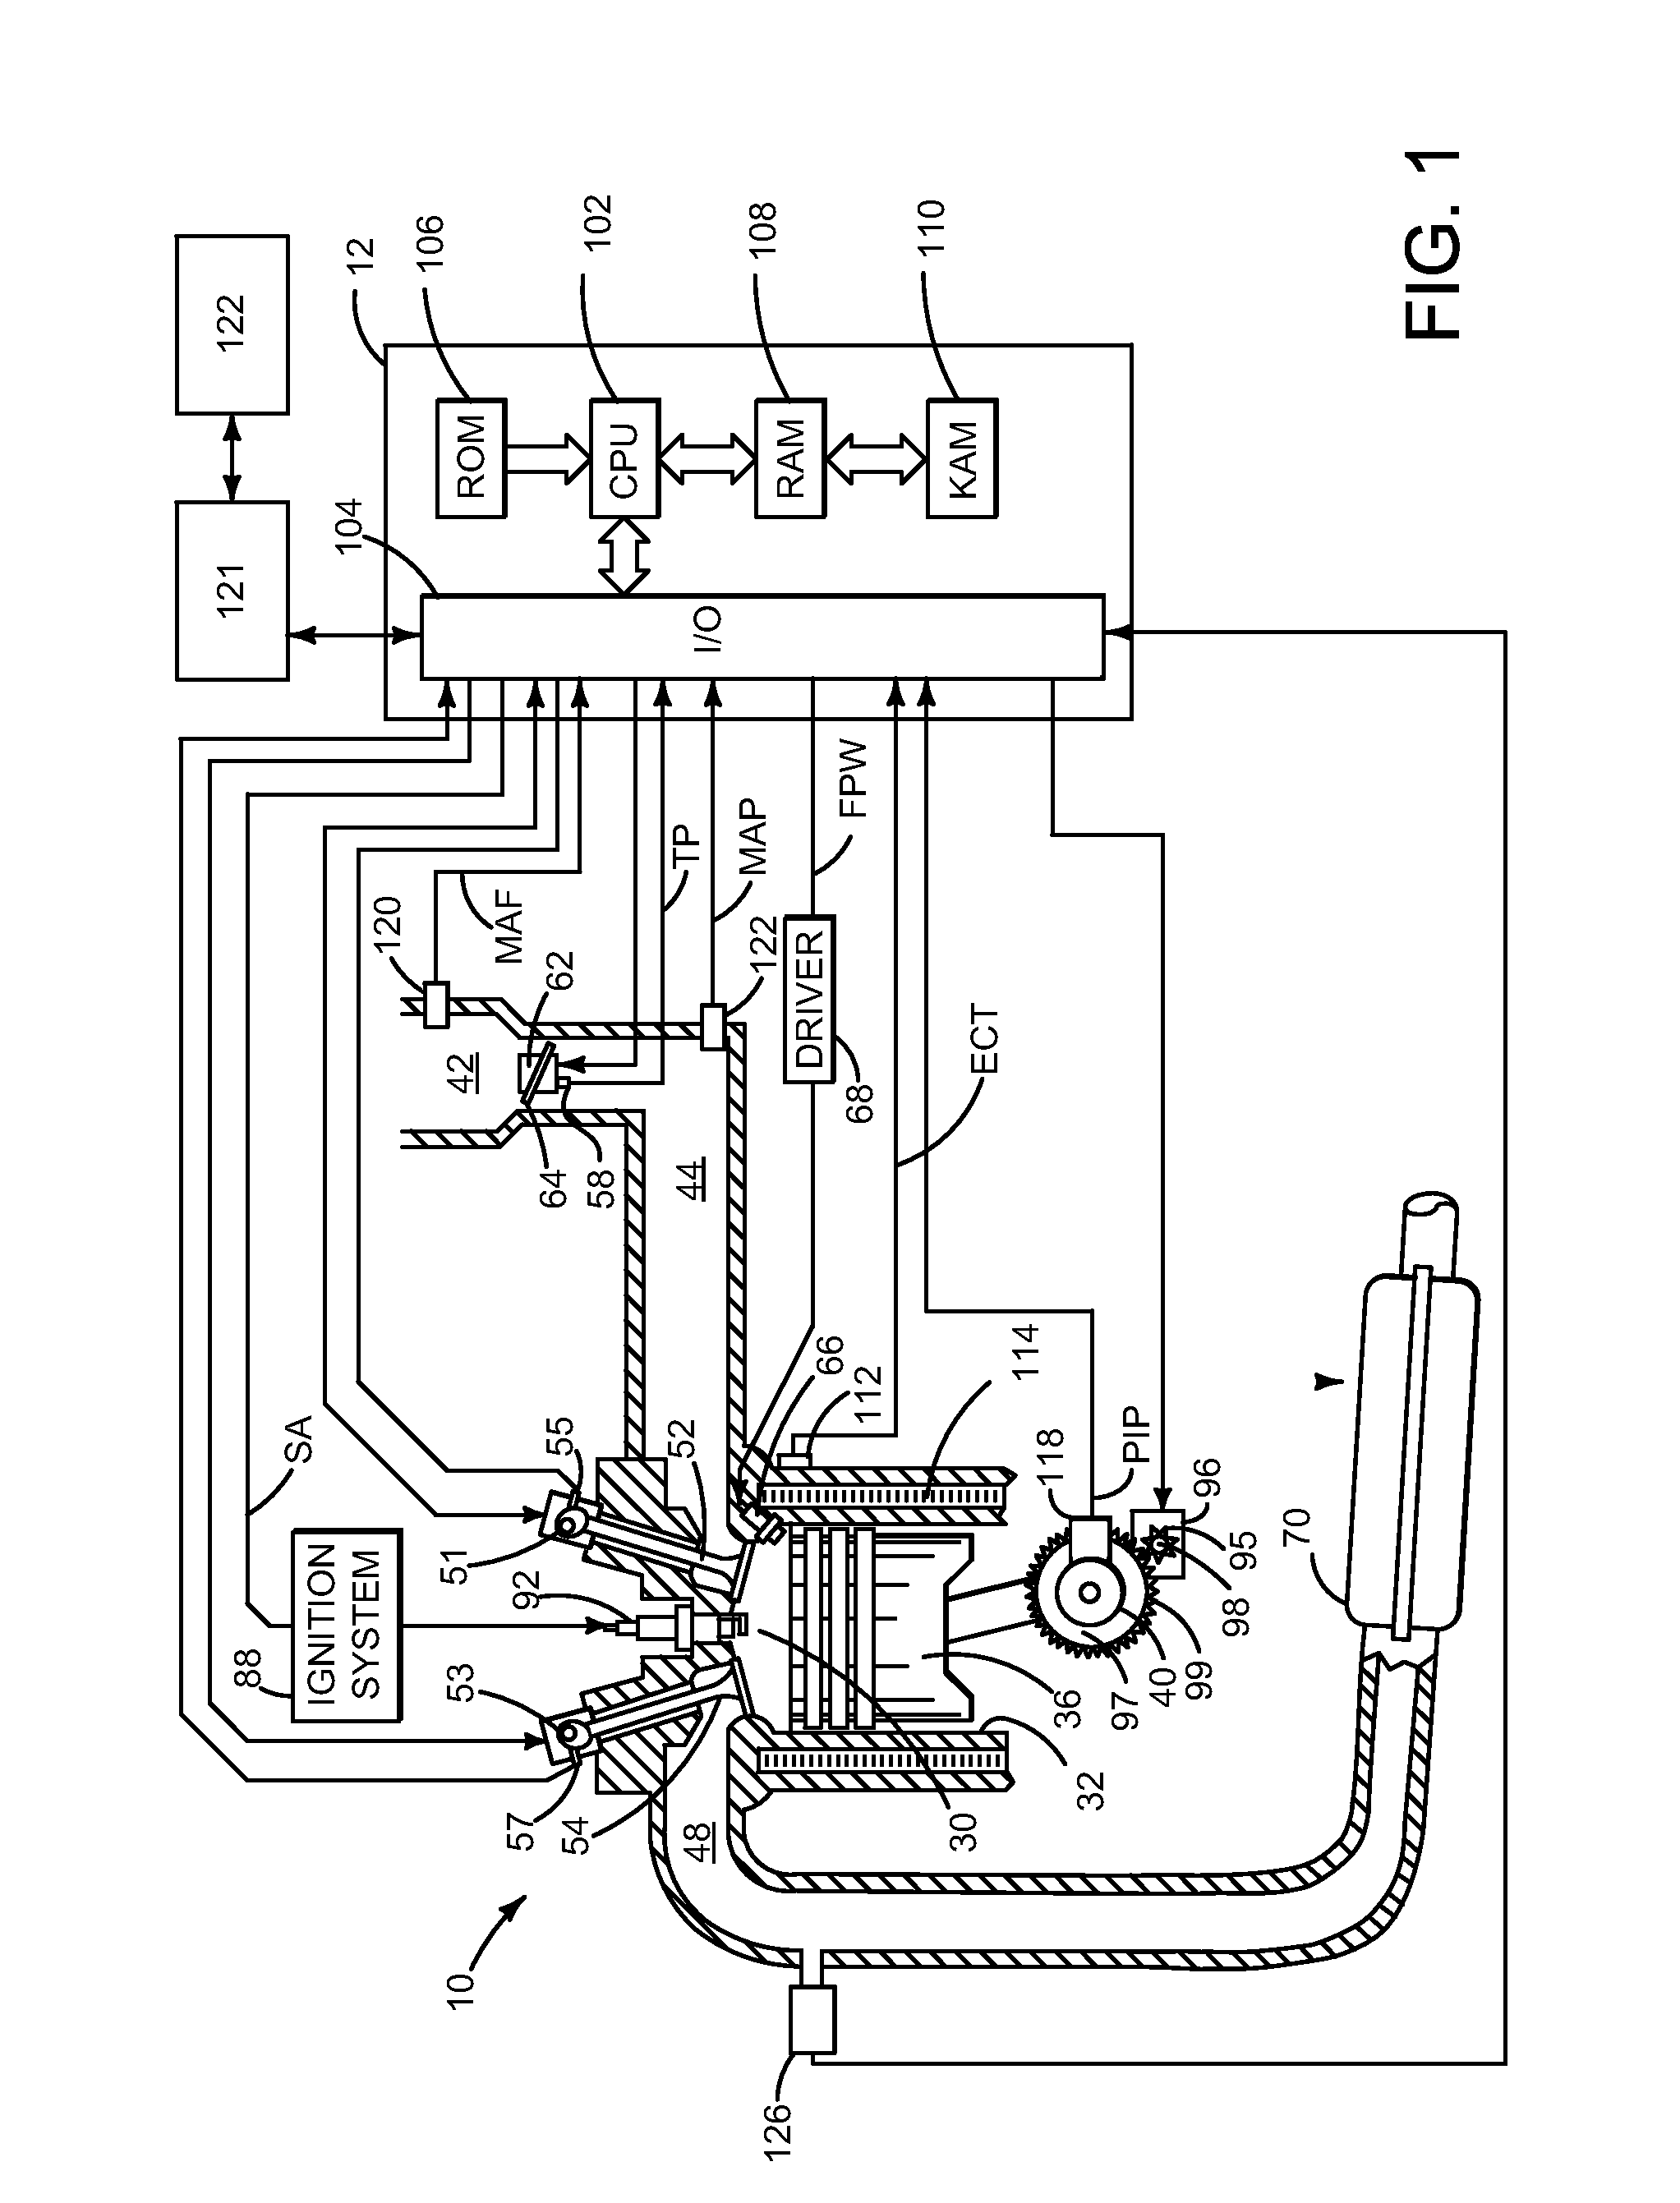 Systems and methods for driveline torque control